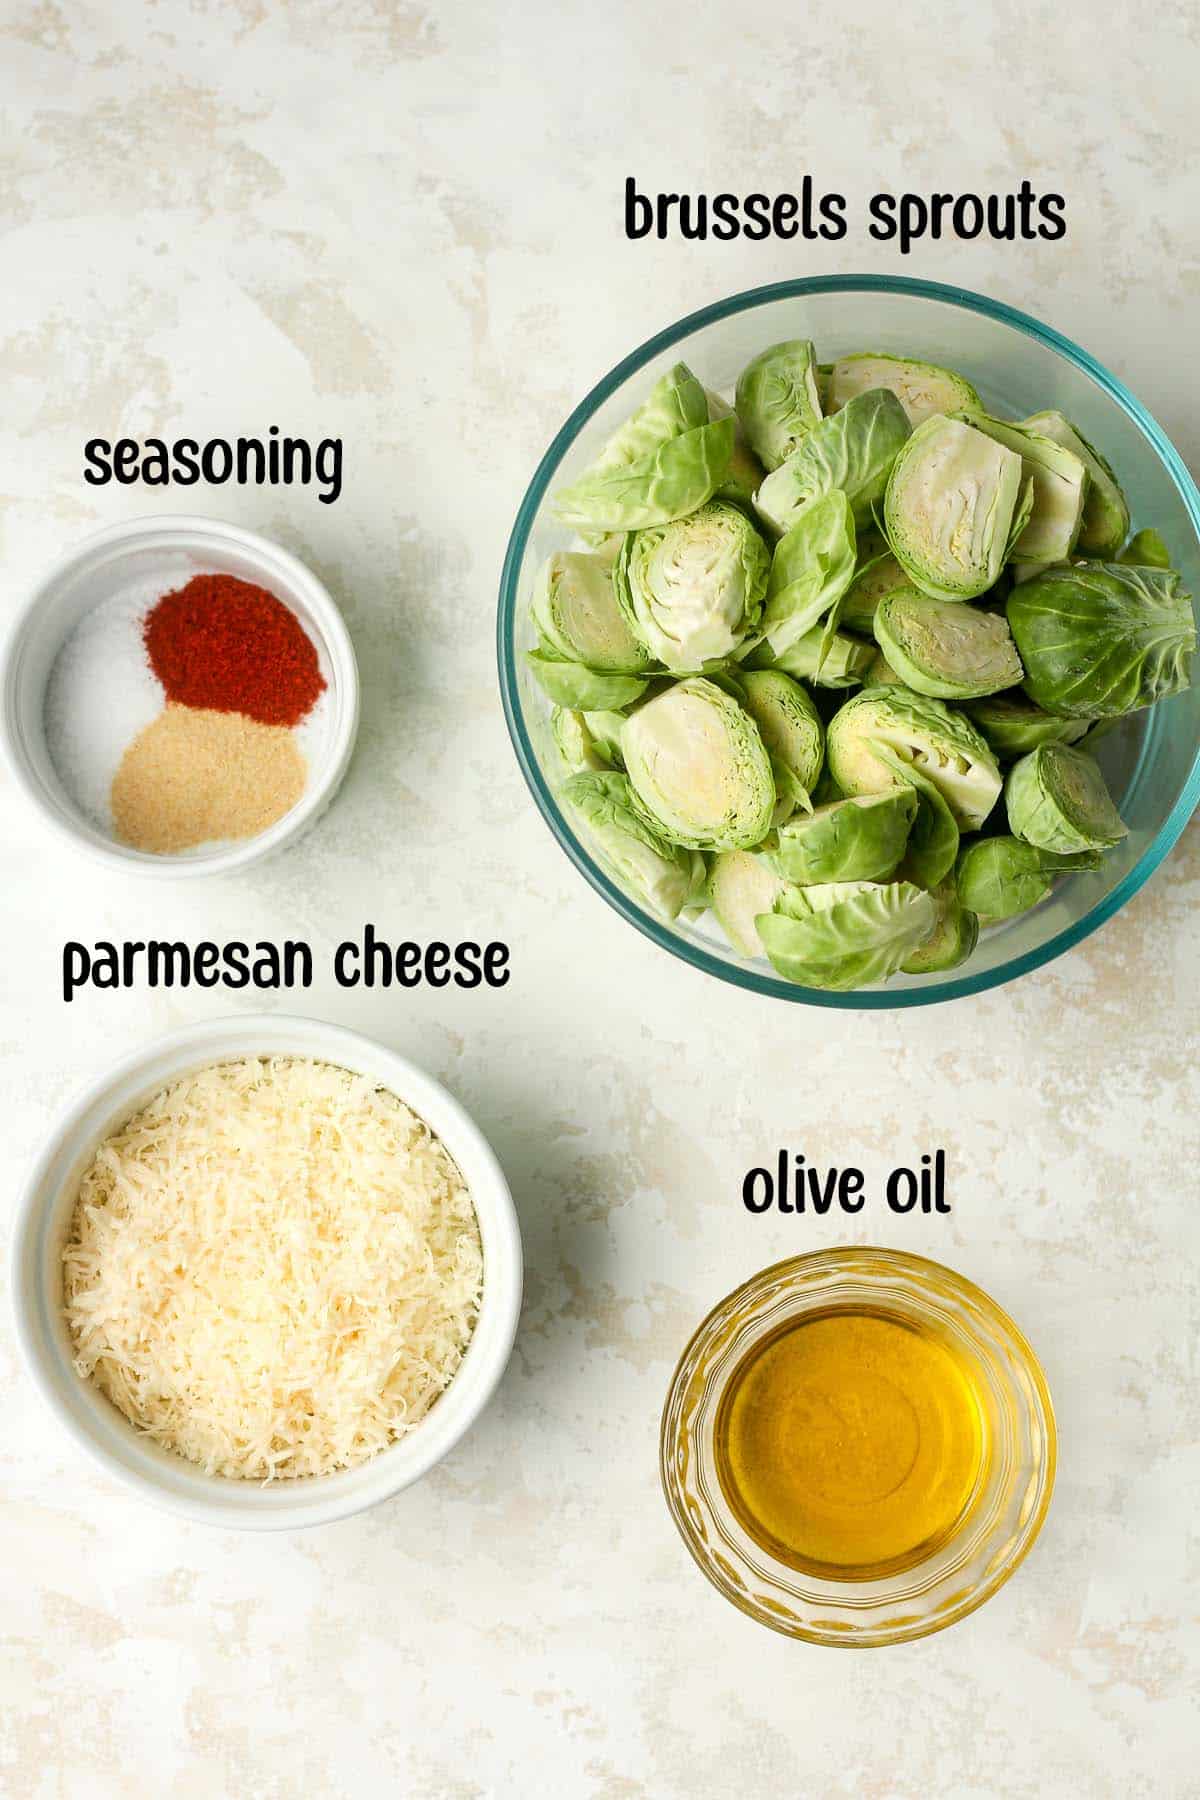 The labeled ingredients for the crispy brussels sprouts.